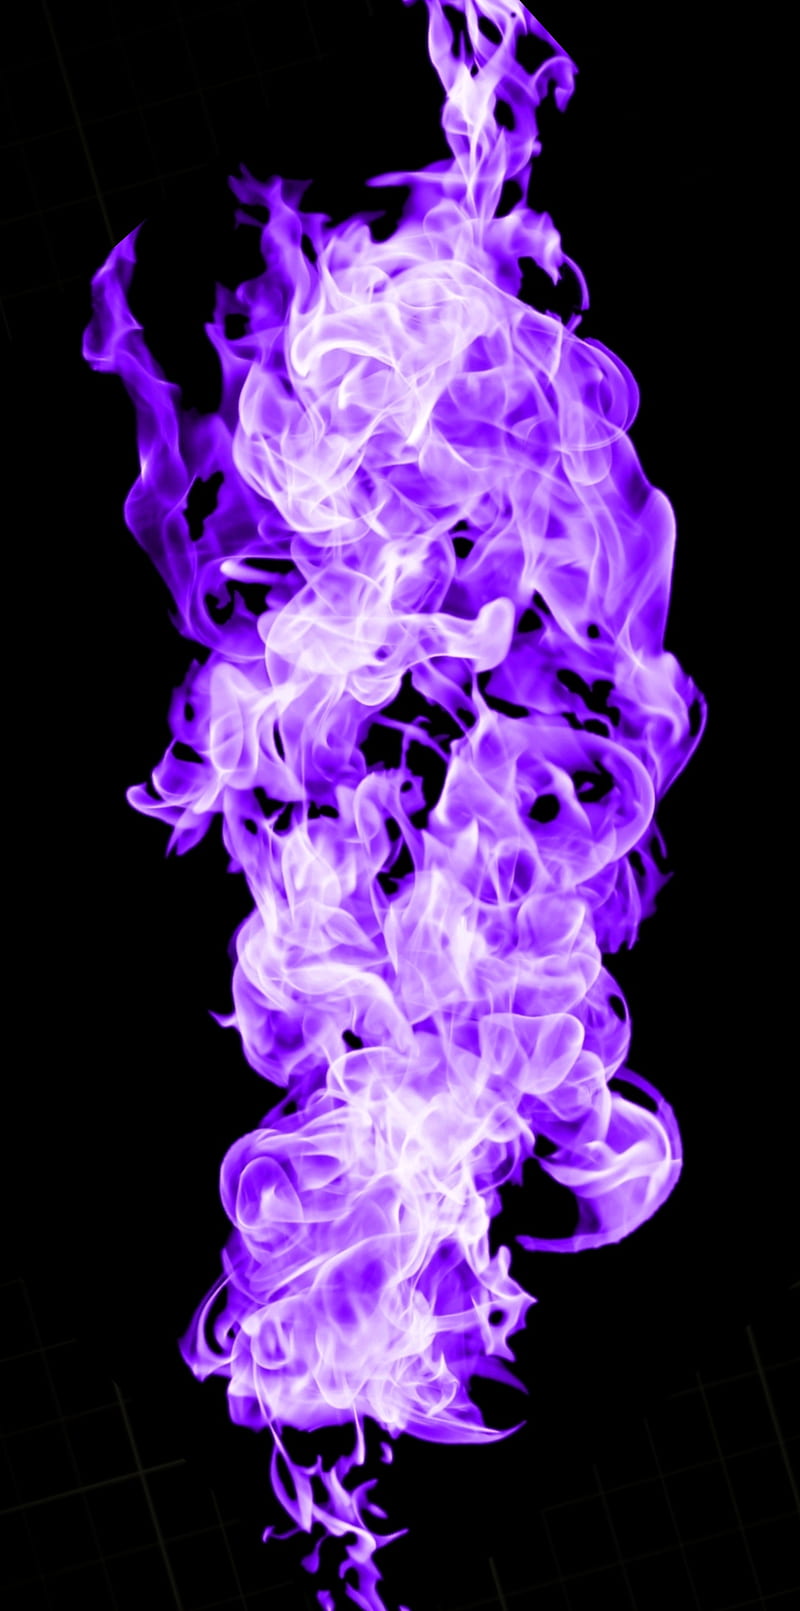 1366x768px  free download  HD wallpaper purple flame graphic art flames  flickering fire burning study  Wallpaper Flare